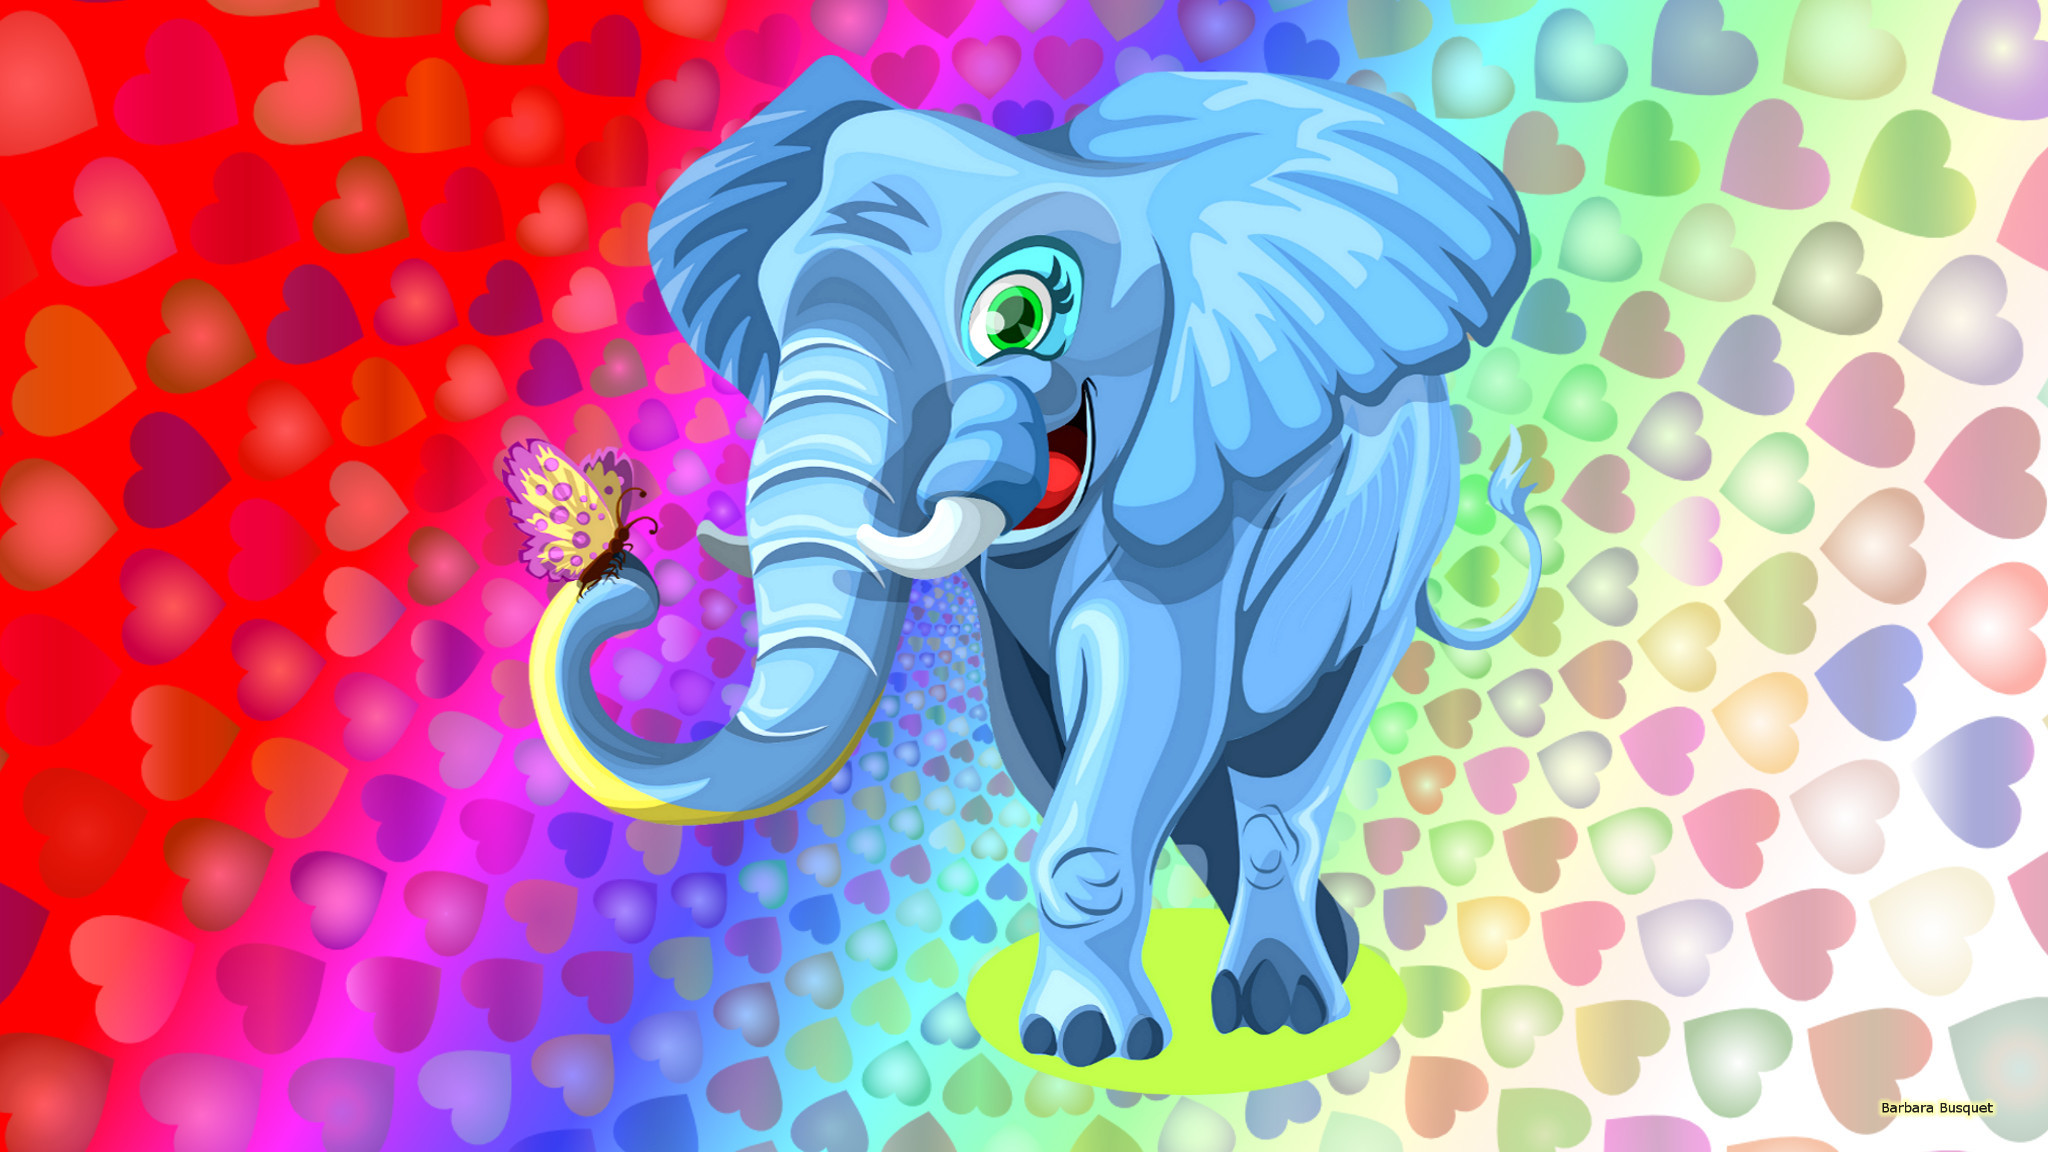 2048x1152 Filename: HD-wallpaper-with-elephant-and-hearts.jpg